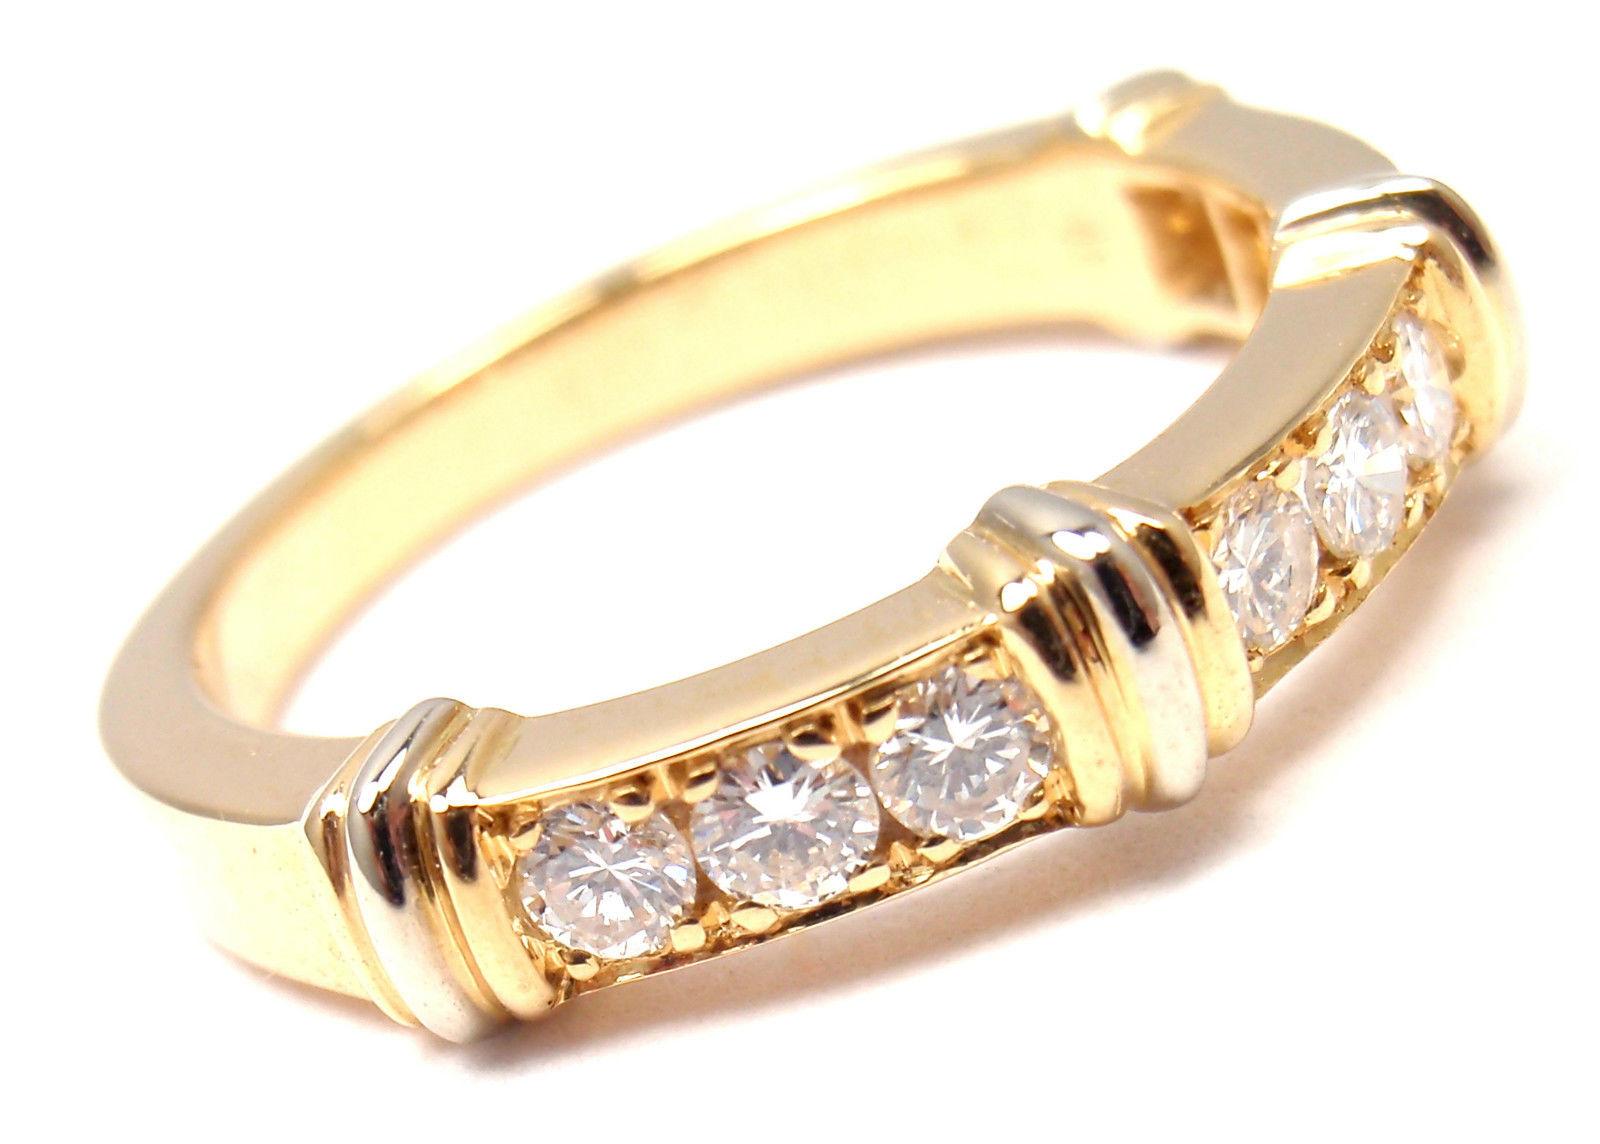 18k Yellow Gold Diamond Band Ring by Cartier. 
With 9 round brilliant cut diamonds VVS1 clarity, E color total weight approximately  .18ct 
Details:
Ring Size:  US 4 1/2, European 48
Width: 2.5mm
Weight: 3.9 grams
Stamped Hallmarks: Cartier 750  48